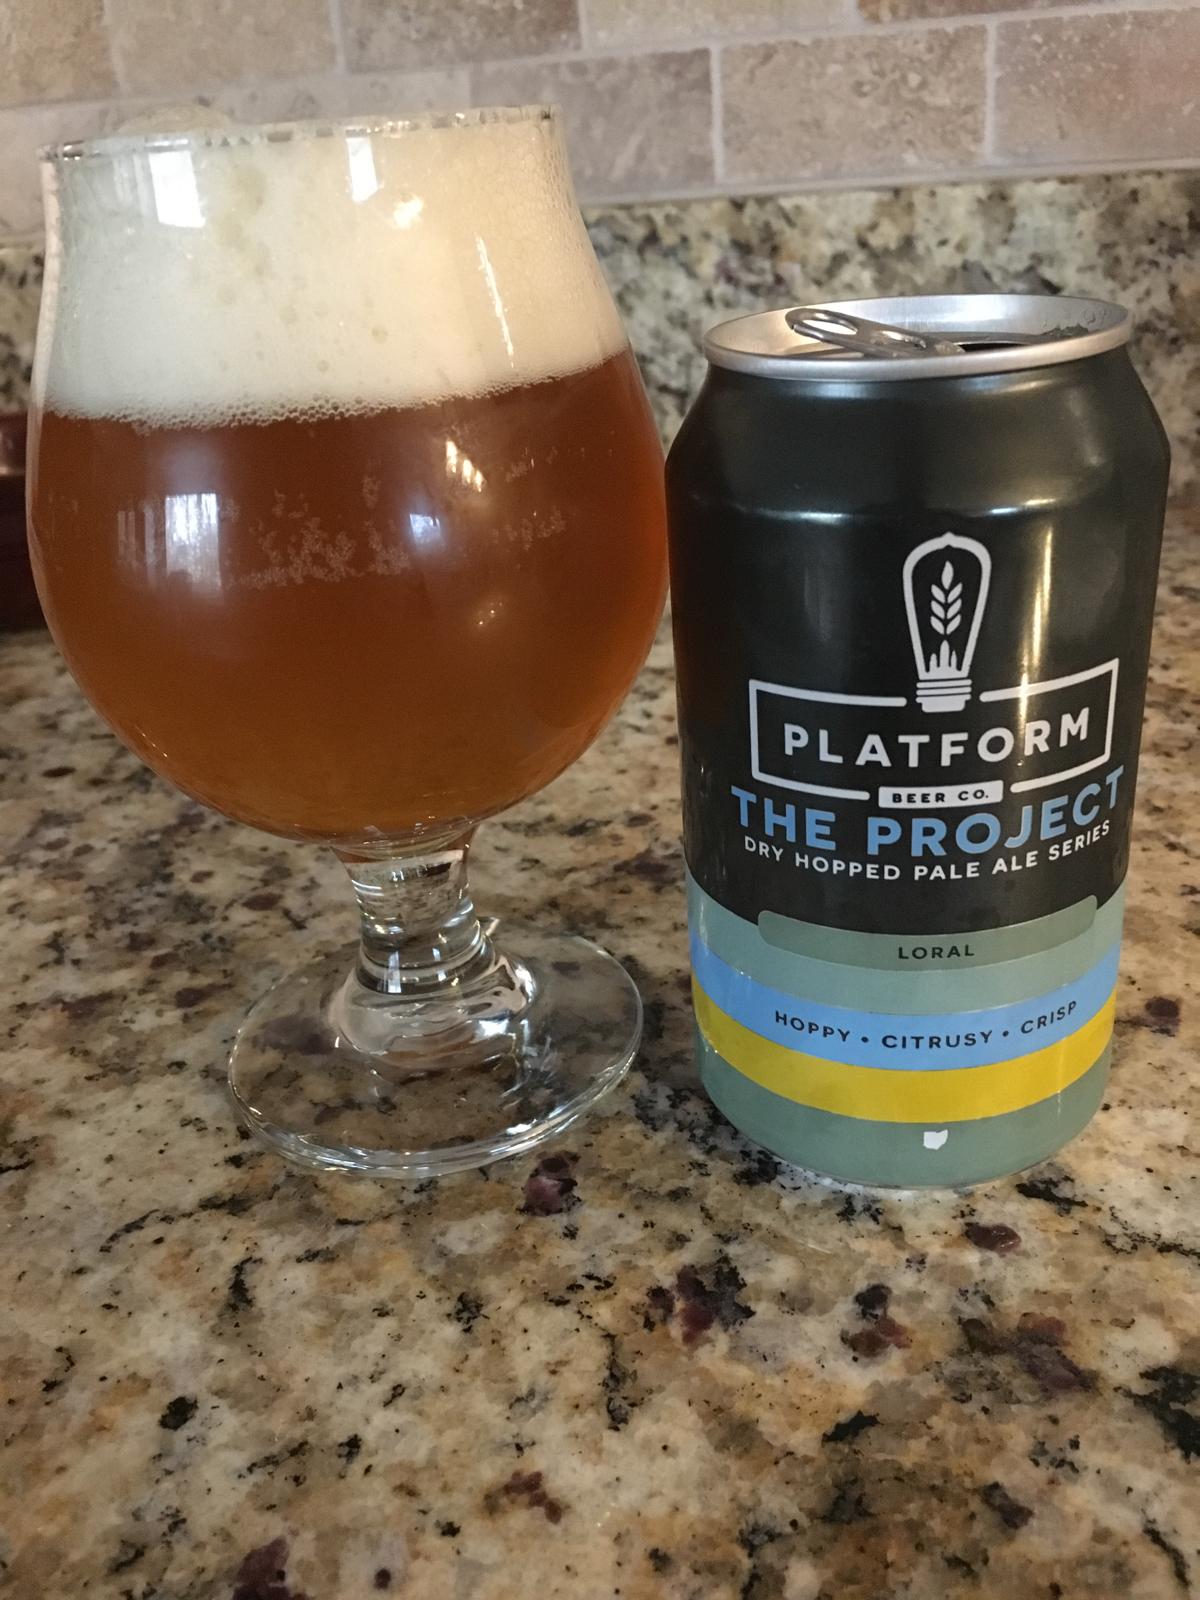 The Project: Dry Hopped Pale Ale Series - Loral